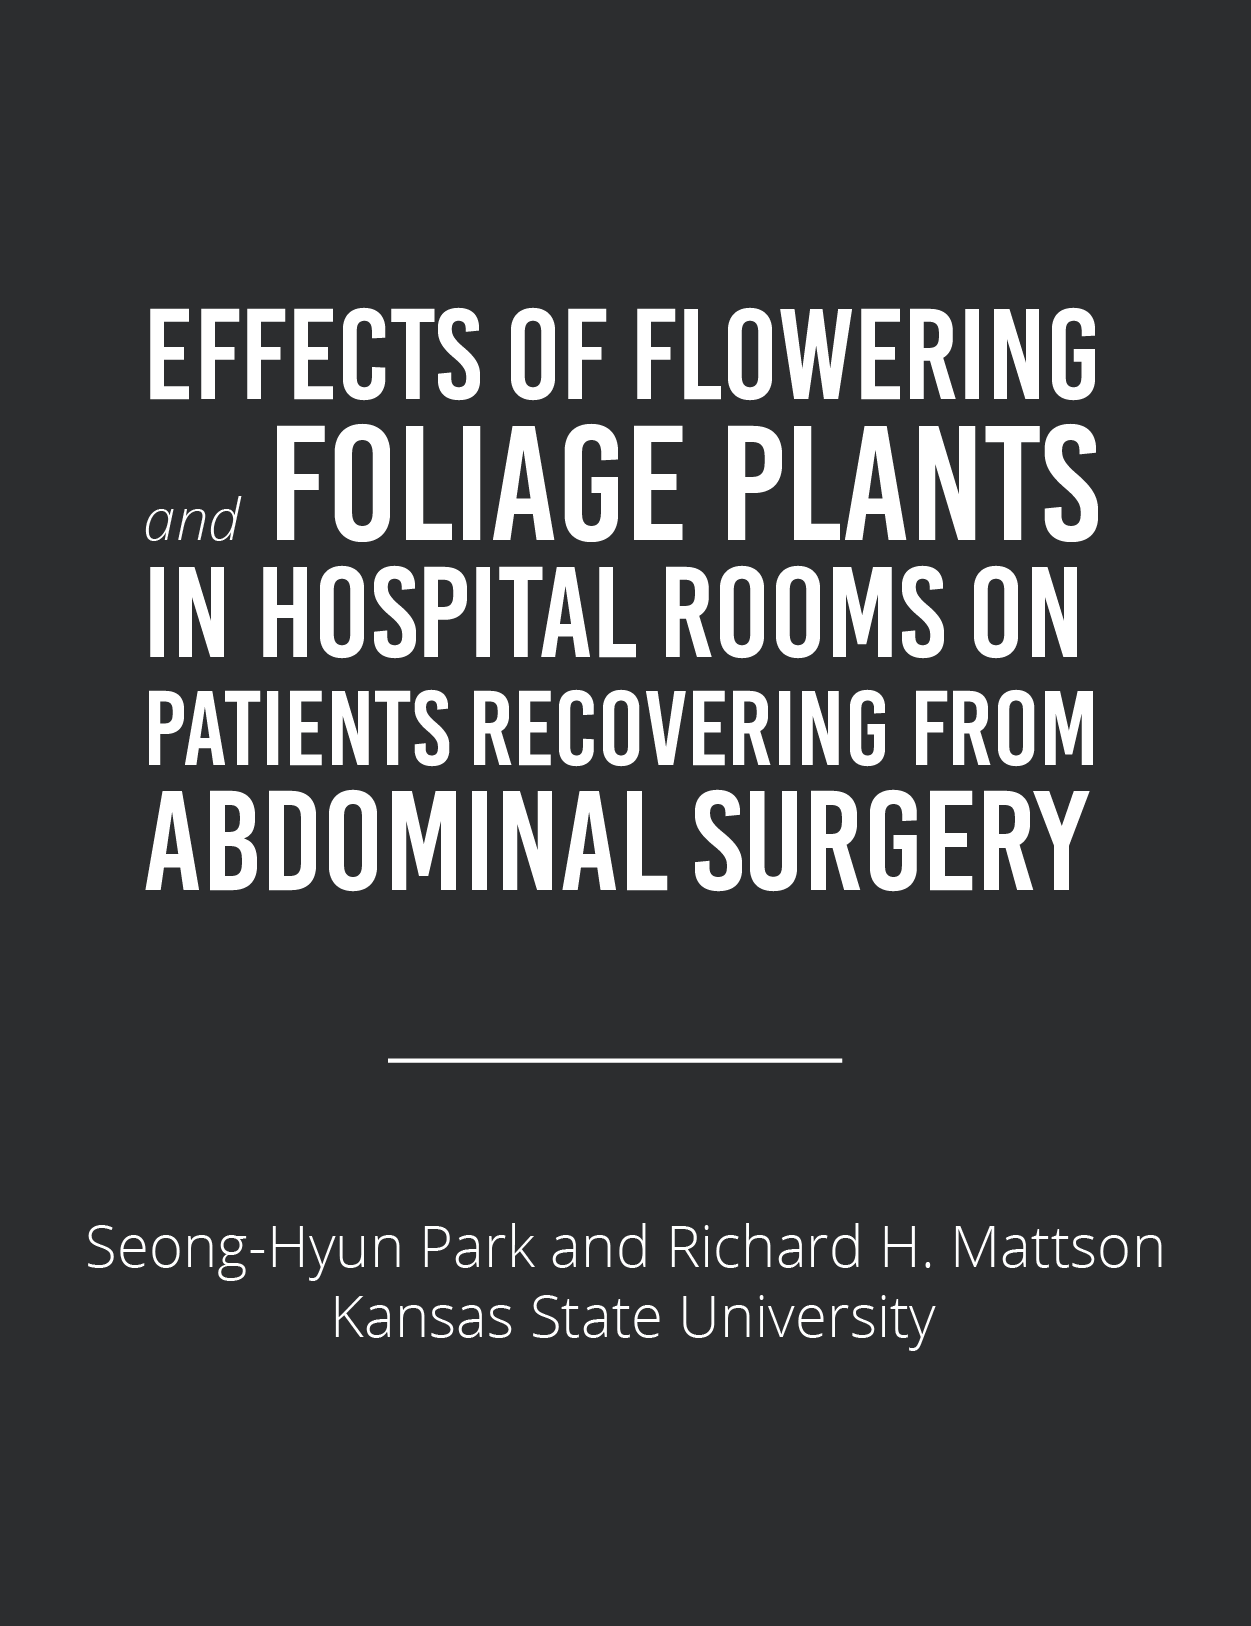 Effects of Flowering & Foliage Plants in Hospital RoomsFeatured Image